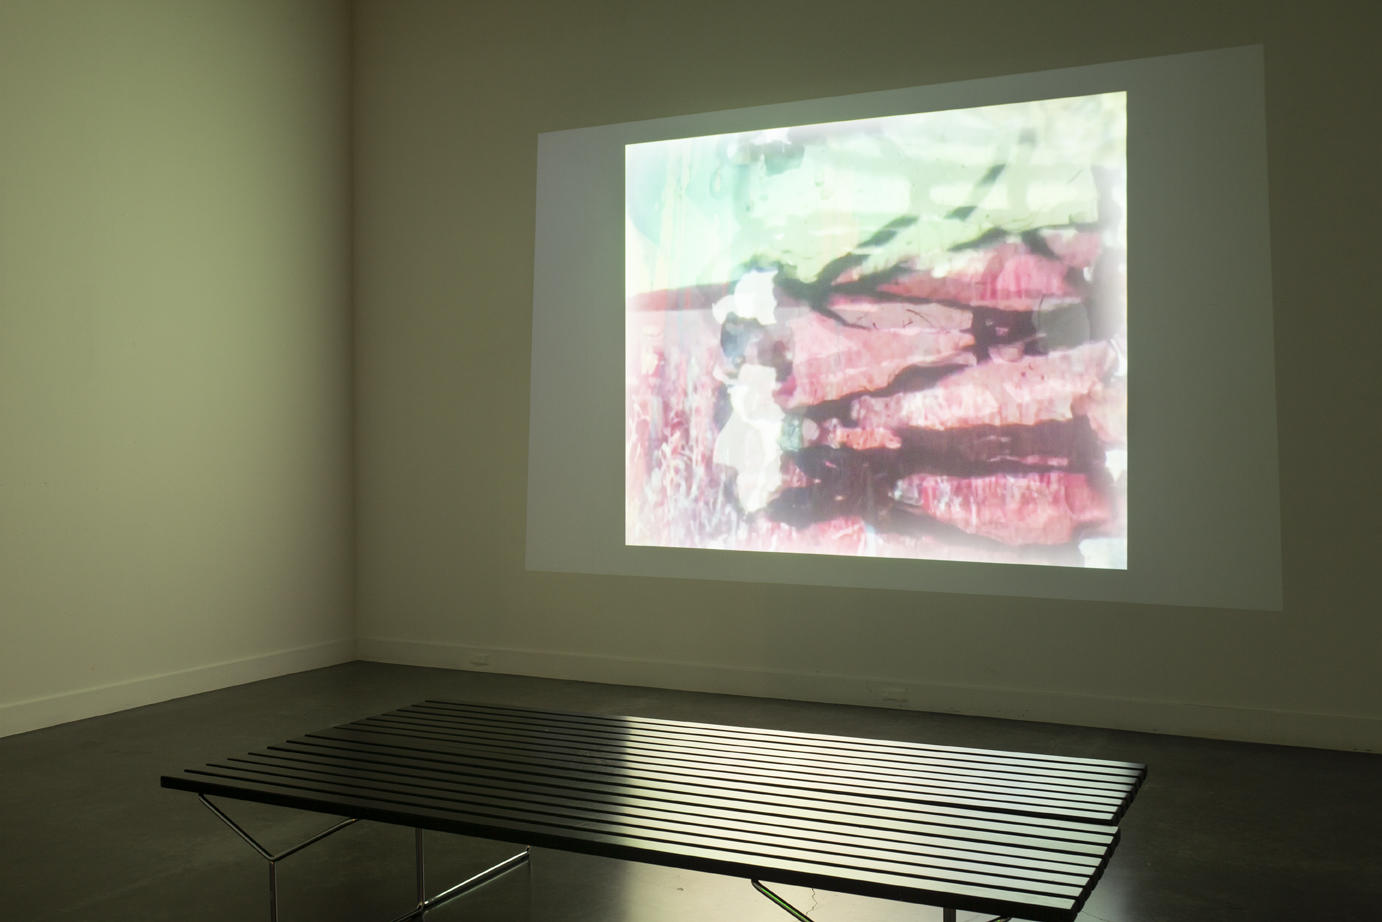 gallery interior; abstract colorful image projected onto a wall